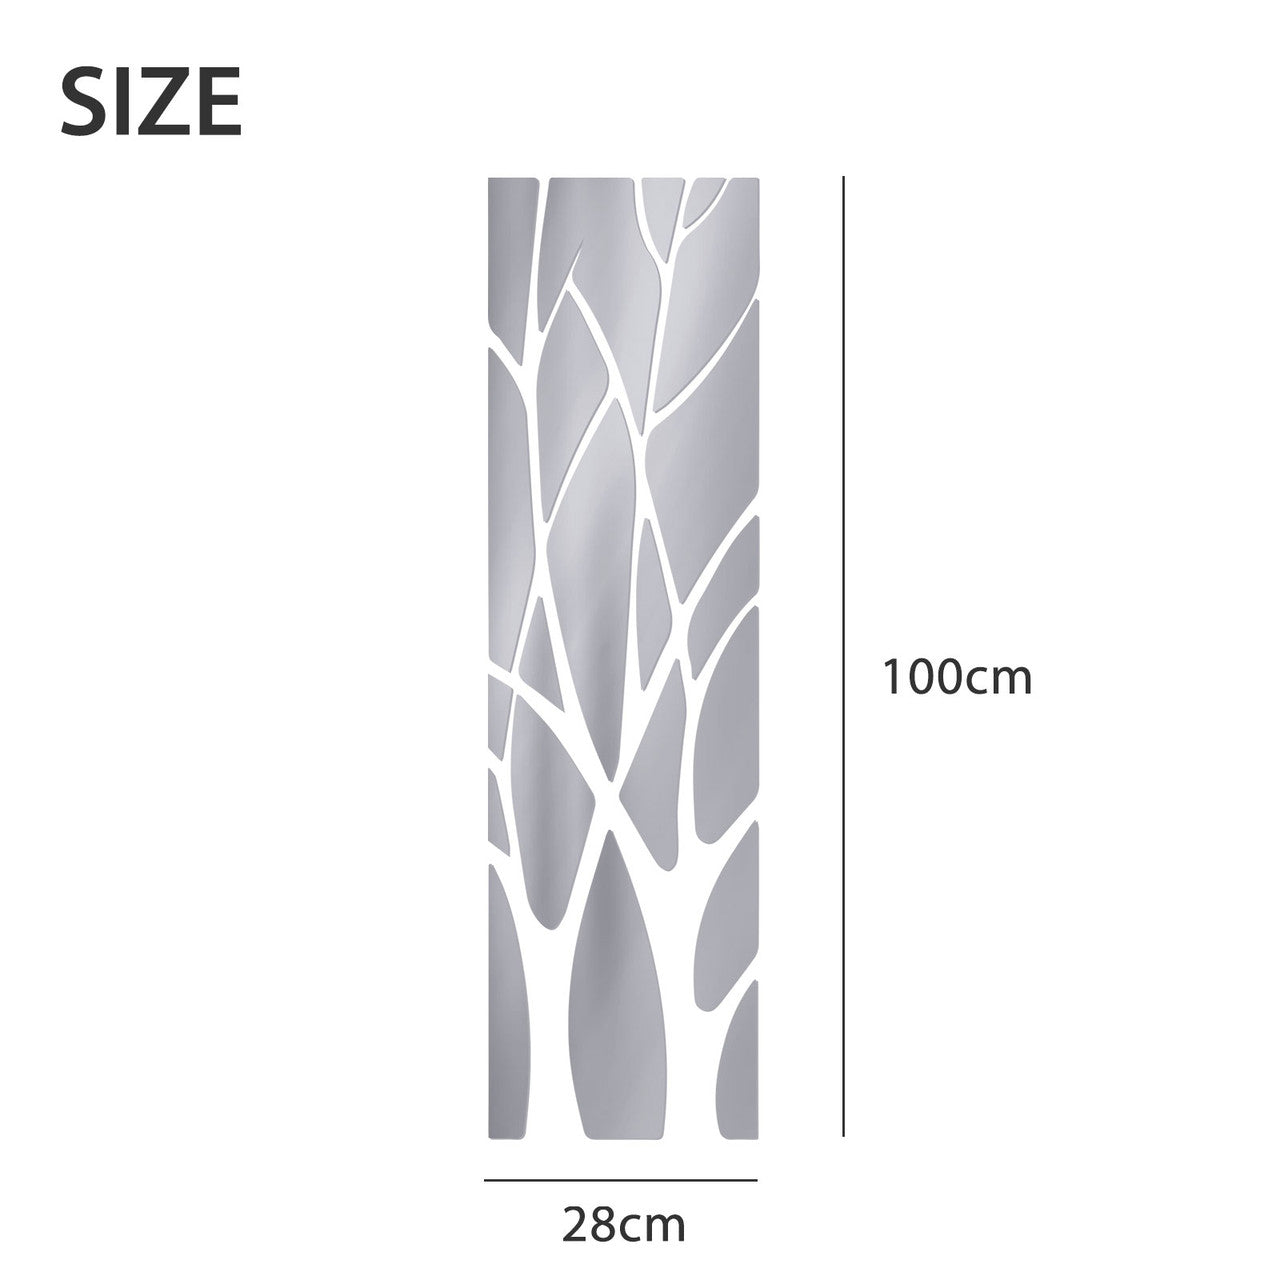 3D Mirror Wall Stickers, Tree Branch Pattern Self Adhesive Removable Acrylic Wall Stickers for DIY Wall Art Living Room Bedroom Sofa TV Background Wall Decal Decoration (11x39inch), Silver